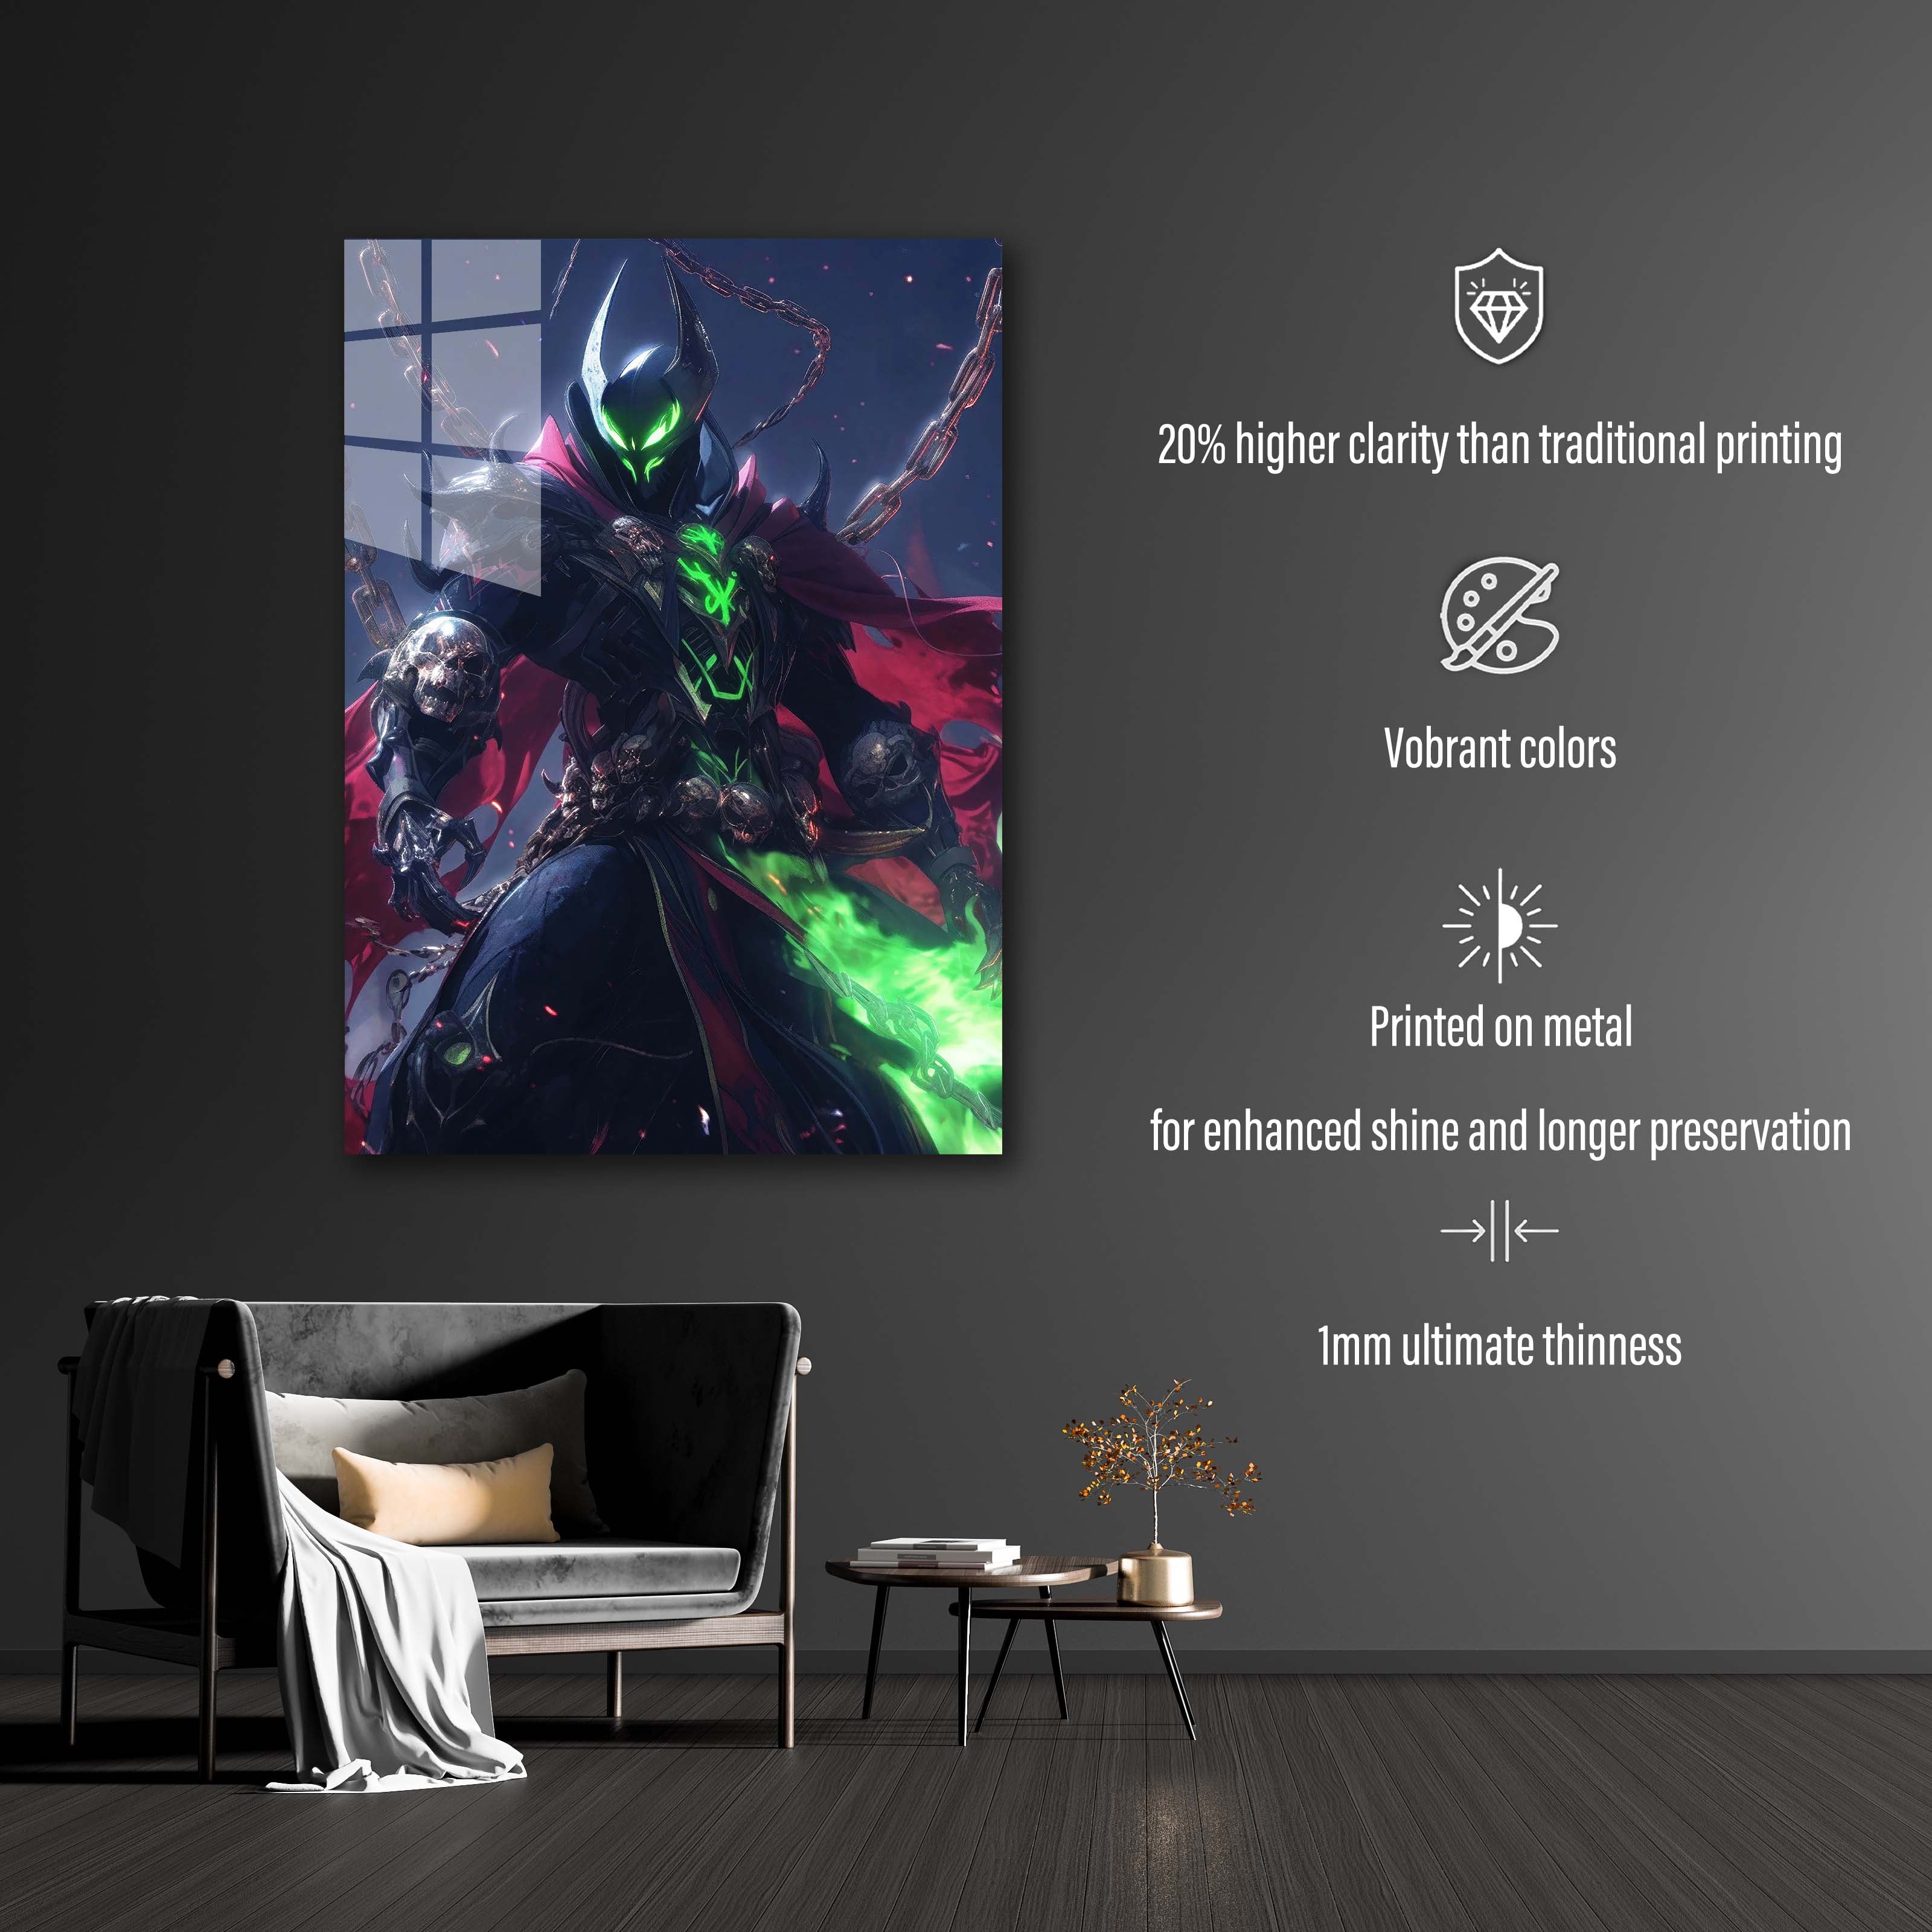 Spawn as WOW character by @visinaire.ai-designed by @visinaire.ai